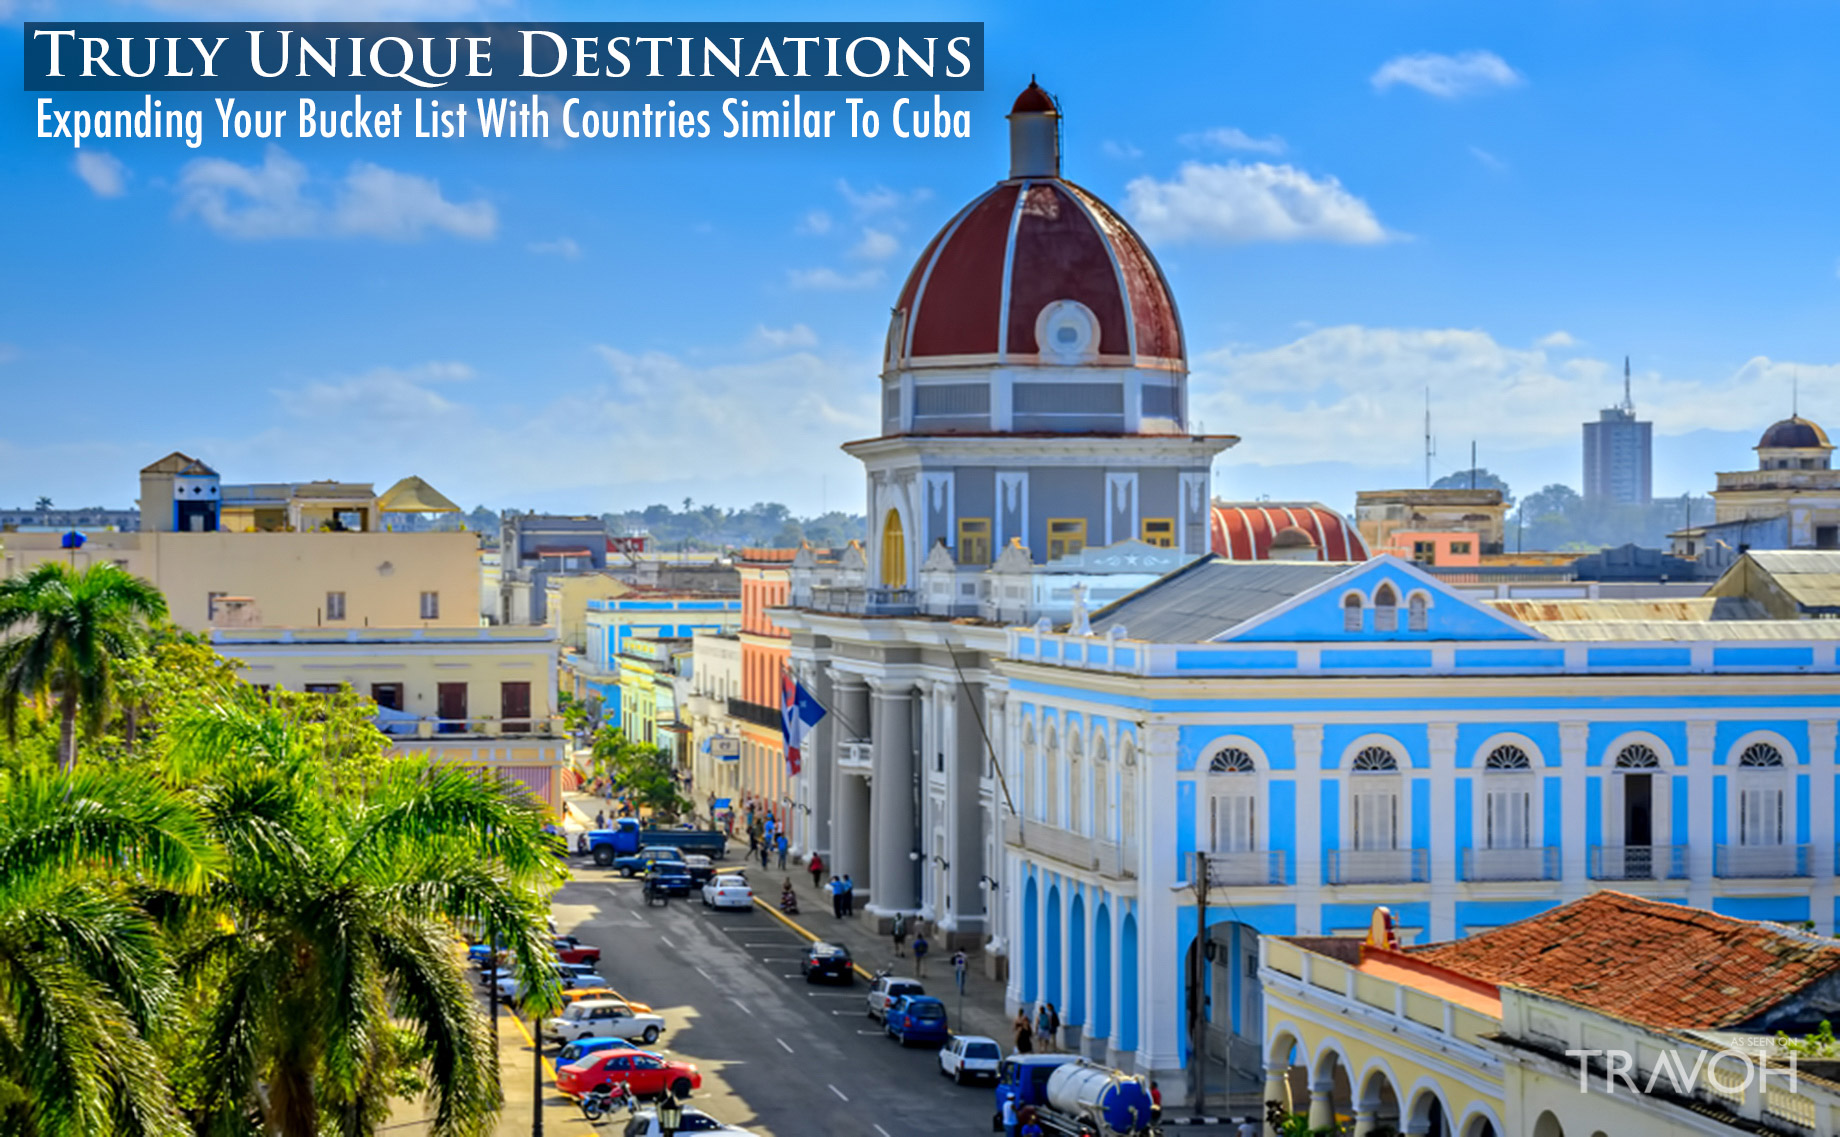 Expanding Your Bucket List With Countries Similar To Cuba